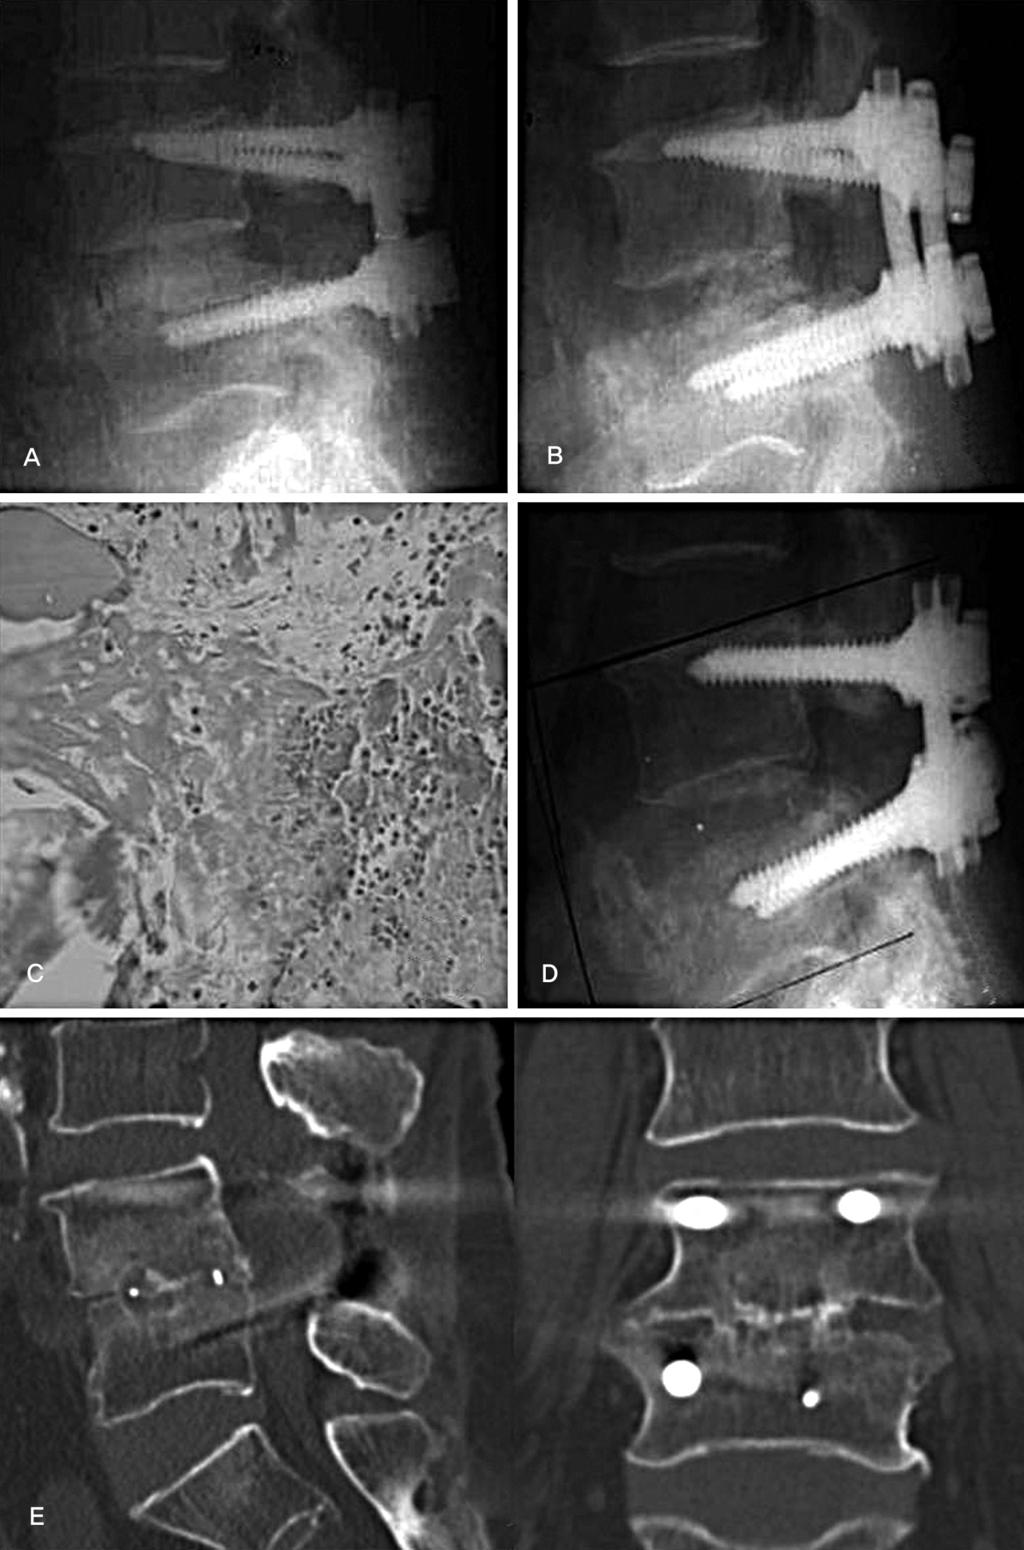 Chae Hyun Lim et al Volume 19 Number 4 December 2012 Fig. 4. Revision for one case of allograft group. At 6-months follow-up, radiograph shows loss of disc height and absorption of the allograft (B).